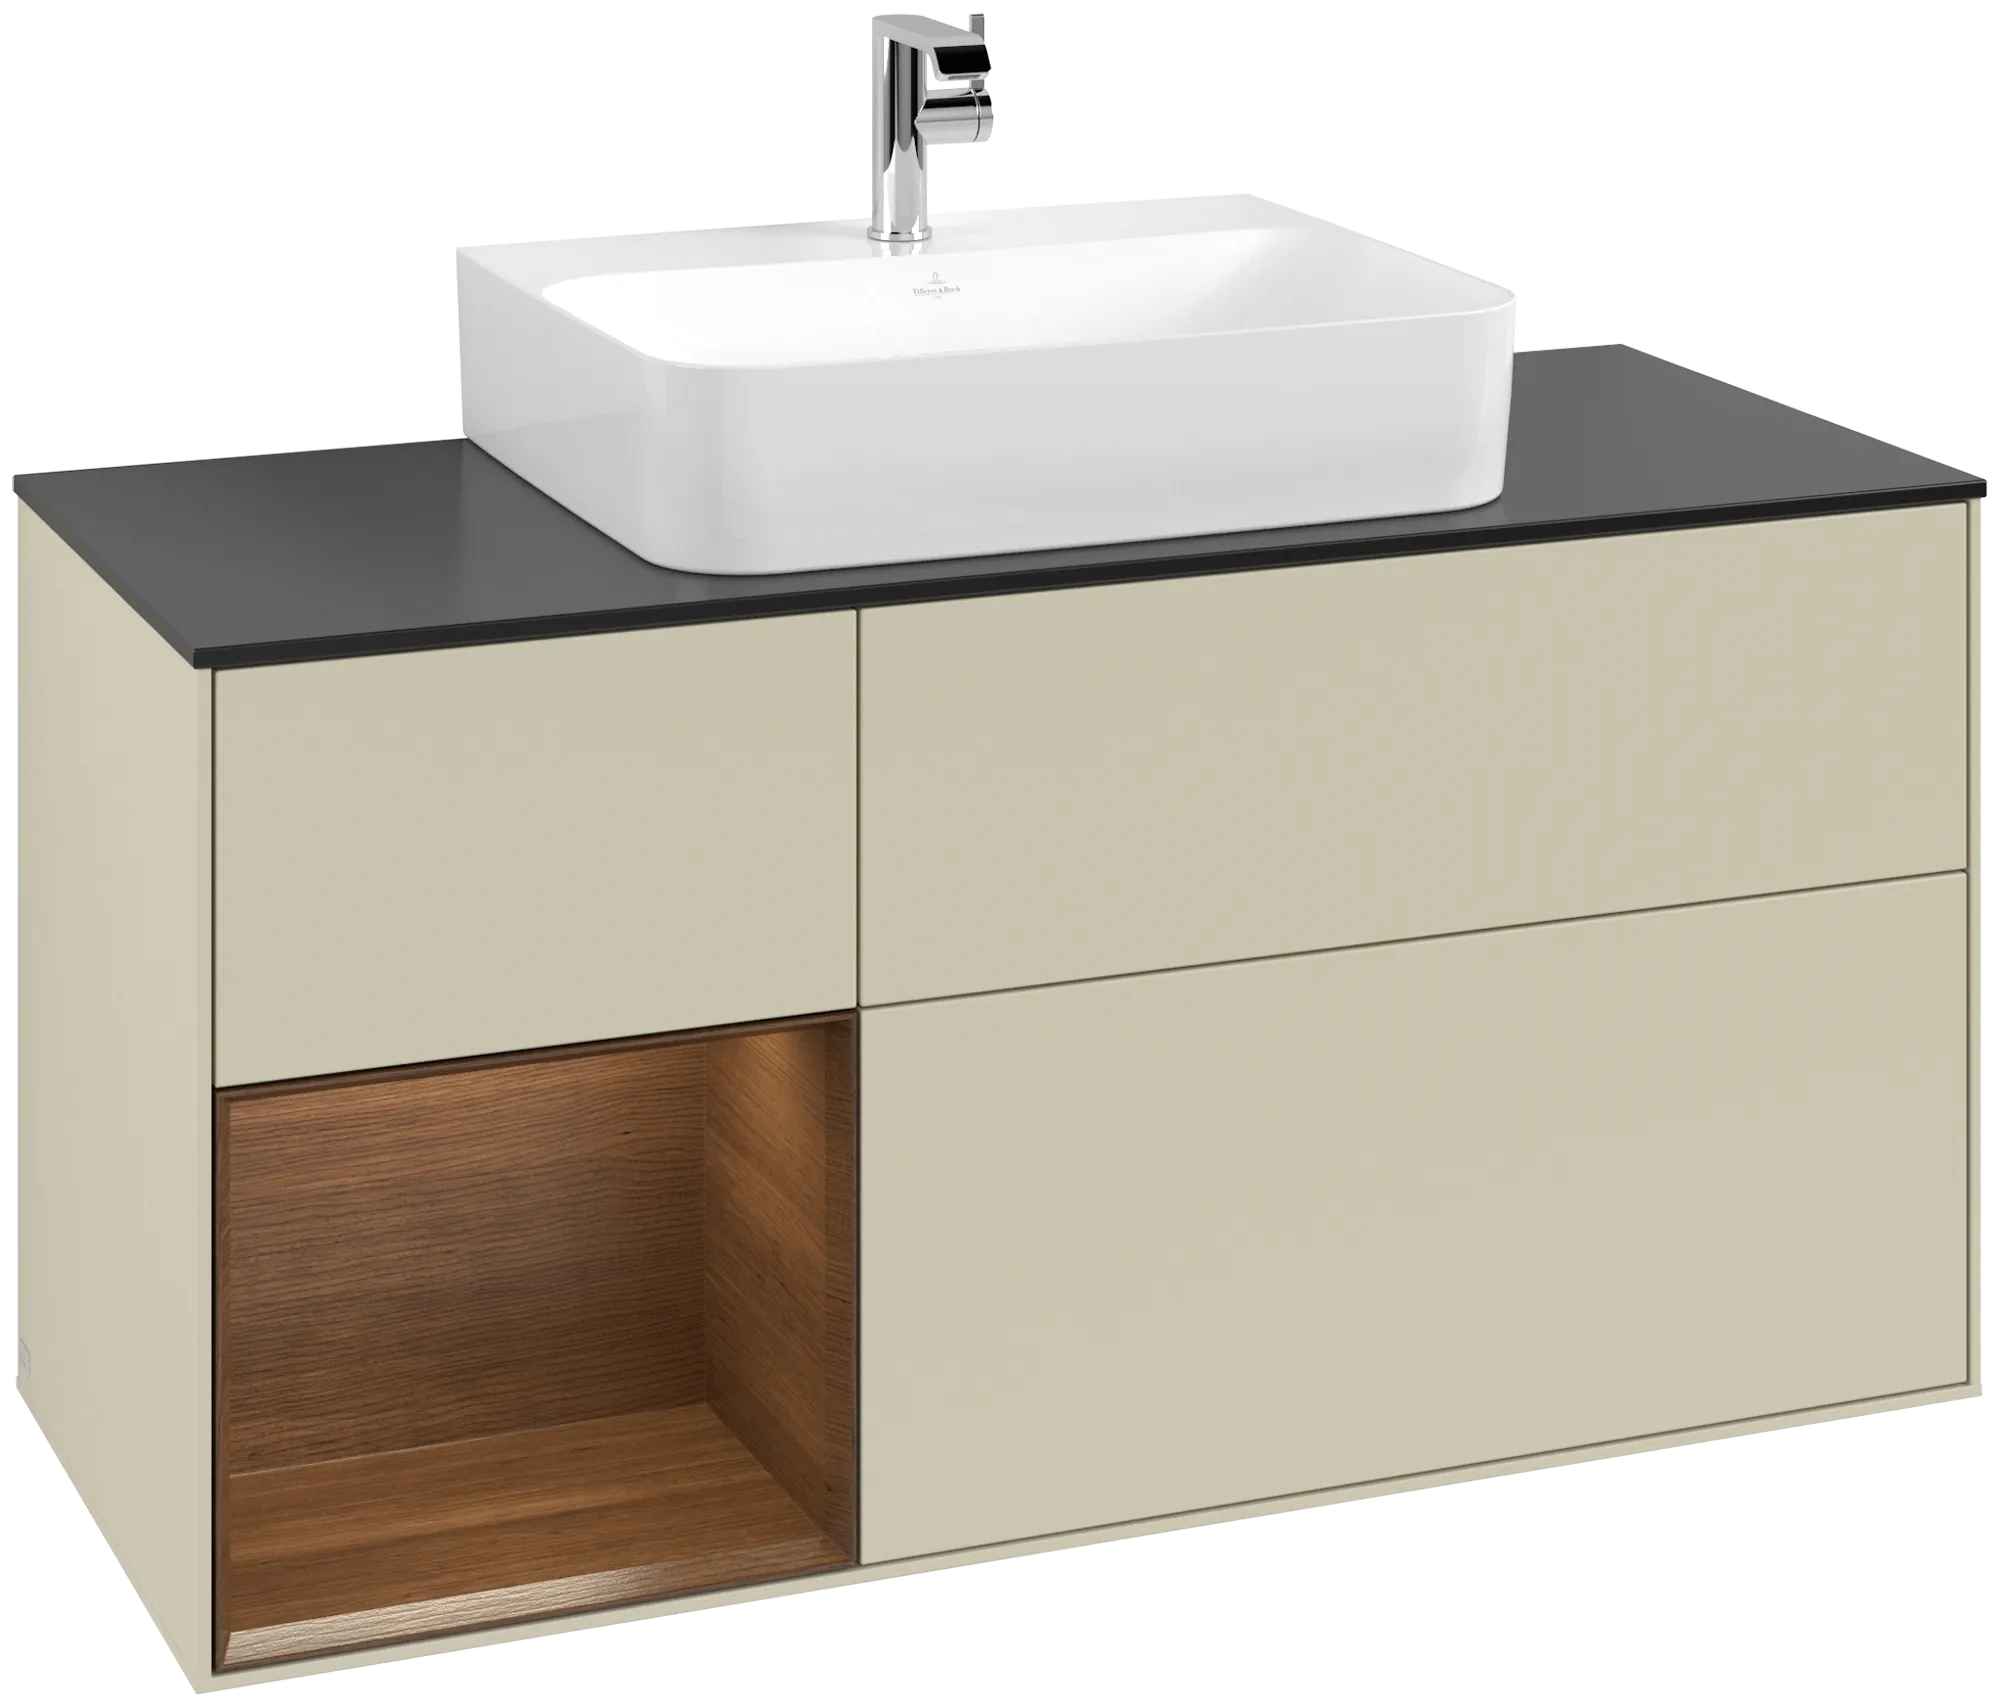 Picture of VILLEROY BOCH Finion Vanity unit, with lighting, 3 pull-out compartments, 1200 x 603 x 501 mm, Silk Grey Matt Lacquer / Walnut Veneer / Glass Black Matt #G162GNHJ